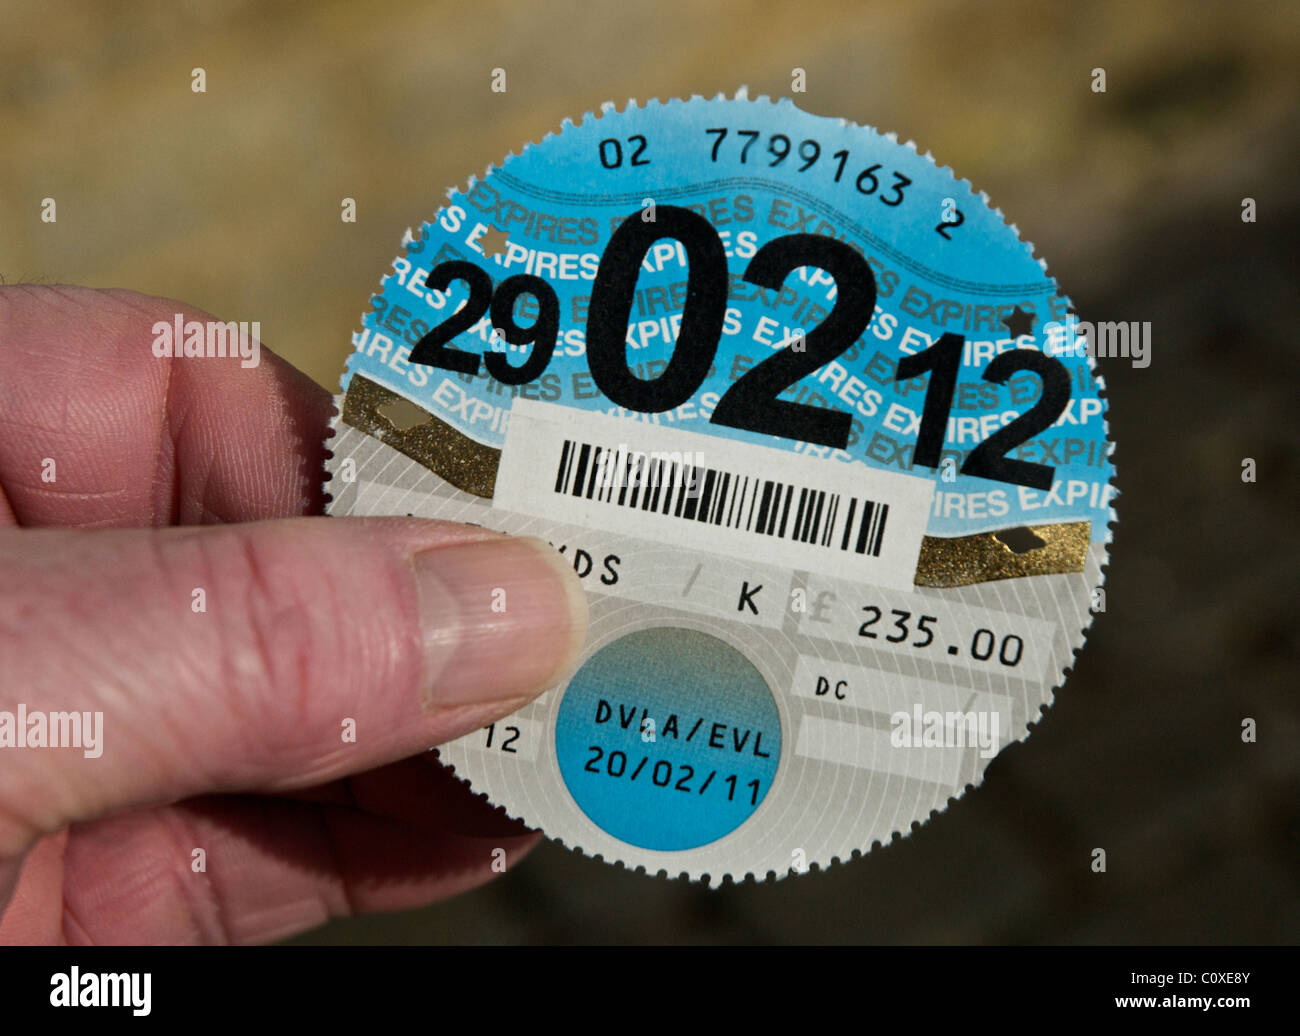 Tax Disc for UK vehicle. Road Fund Licence. DVLA Stock Photo